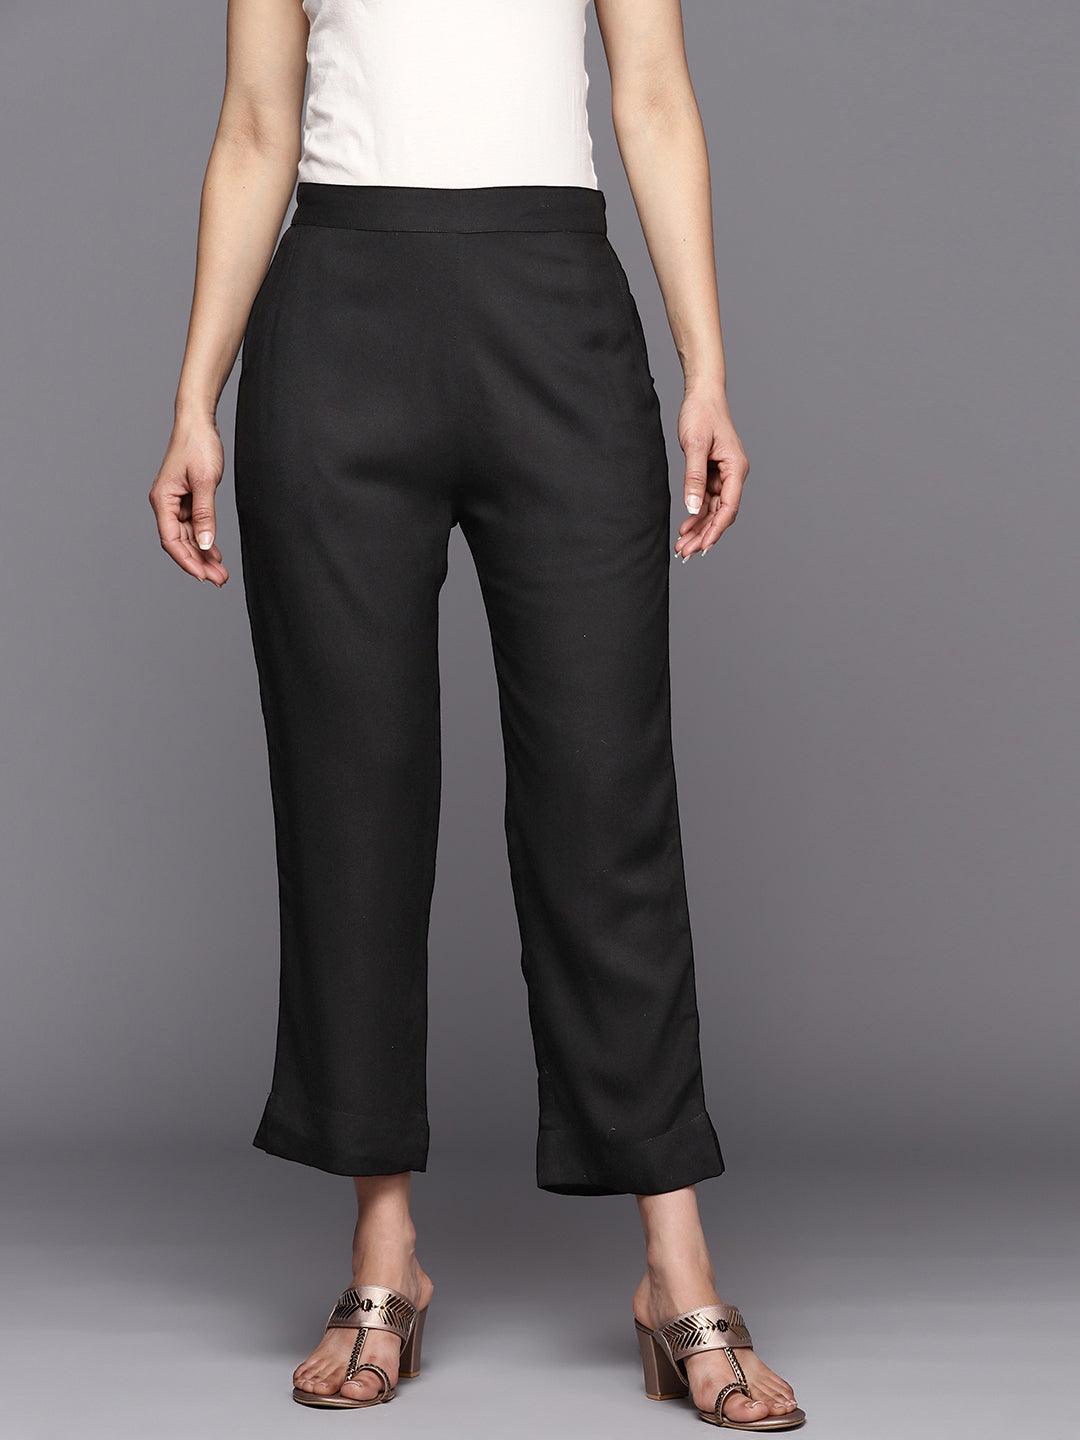 Buy Black Solid Viscose Rayon Trousers Online at Rs.529